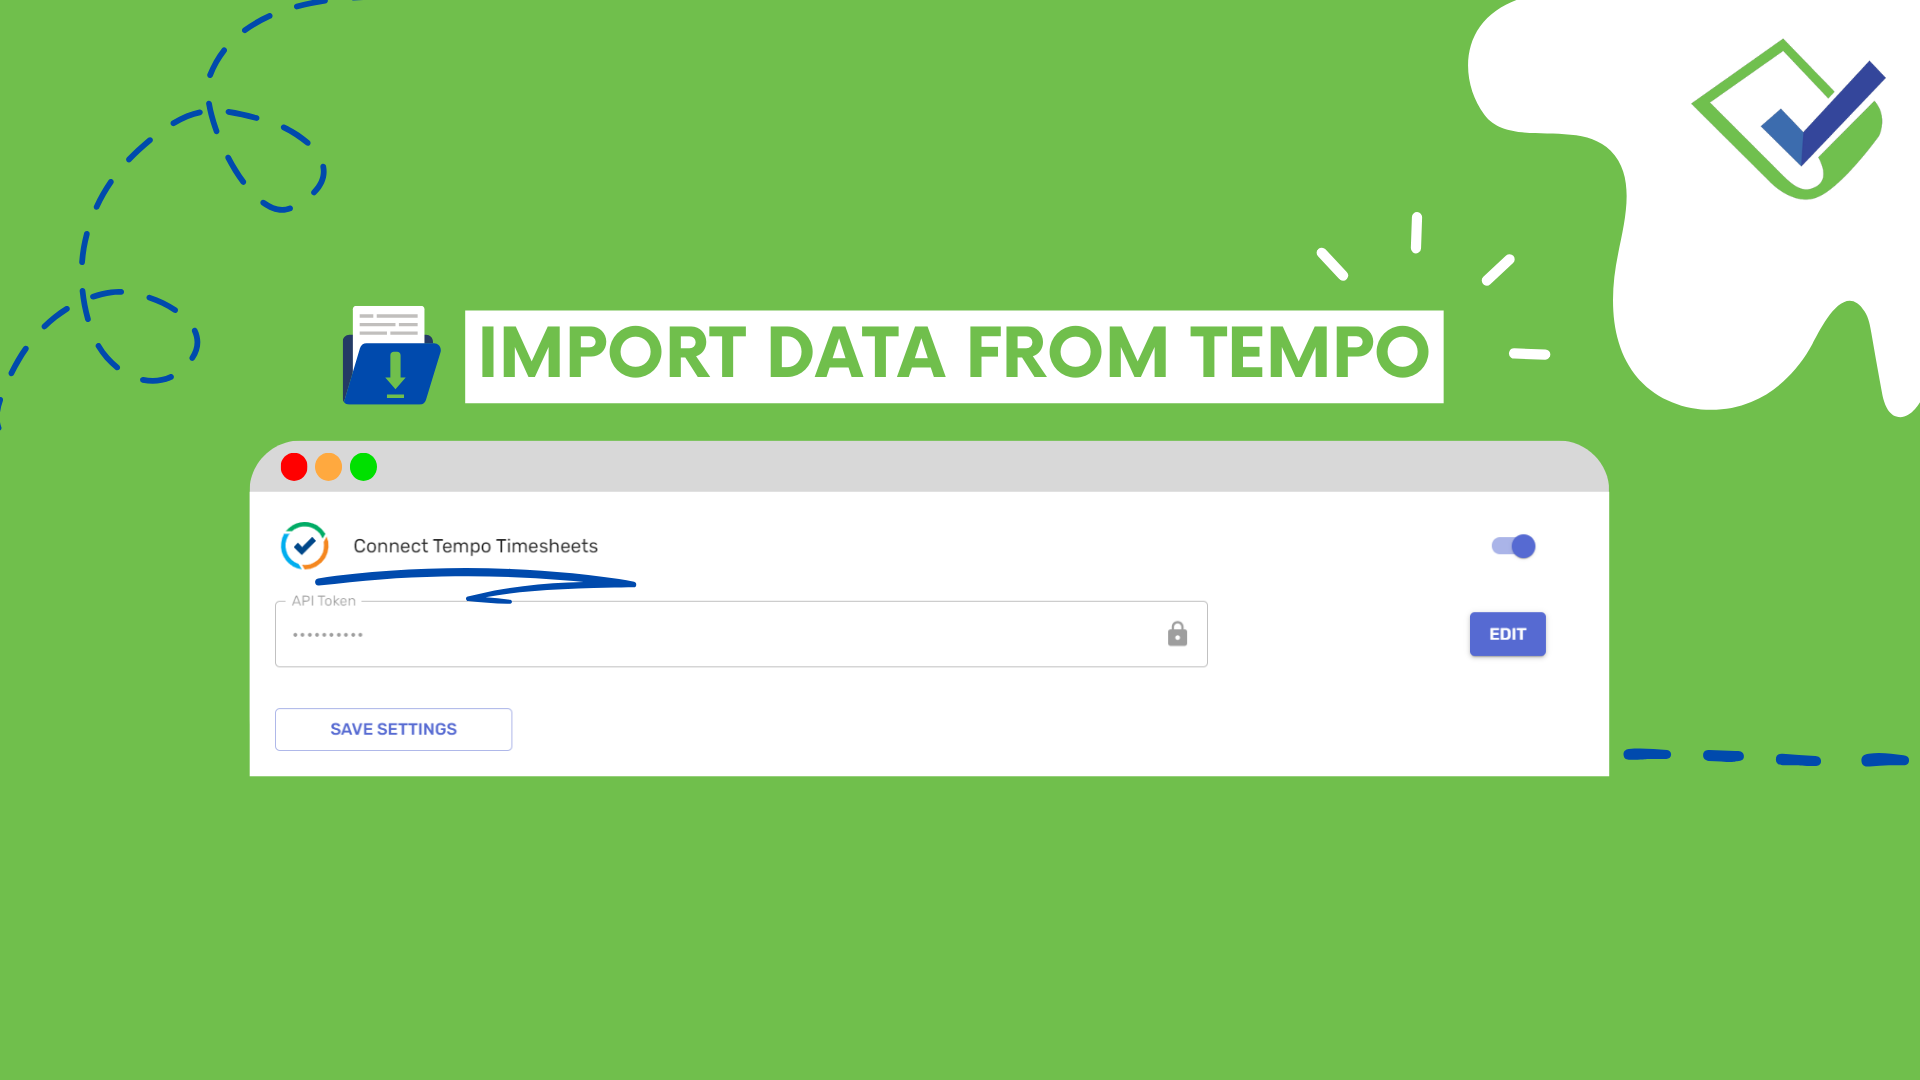  You can import data from Tempo Timesheet in a few clicks!